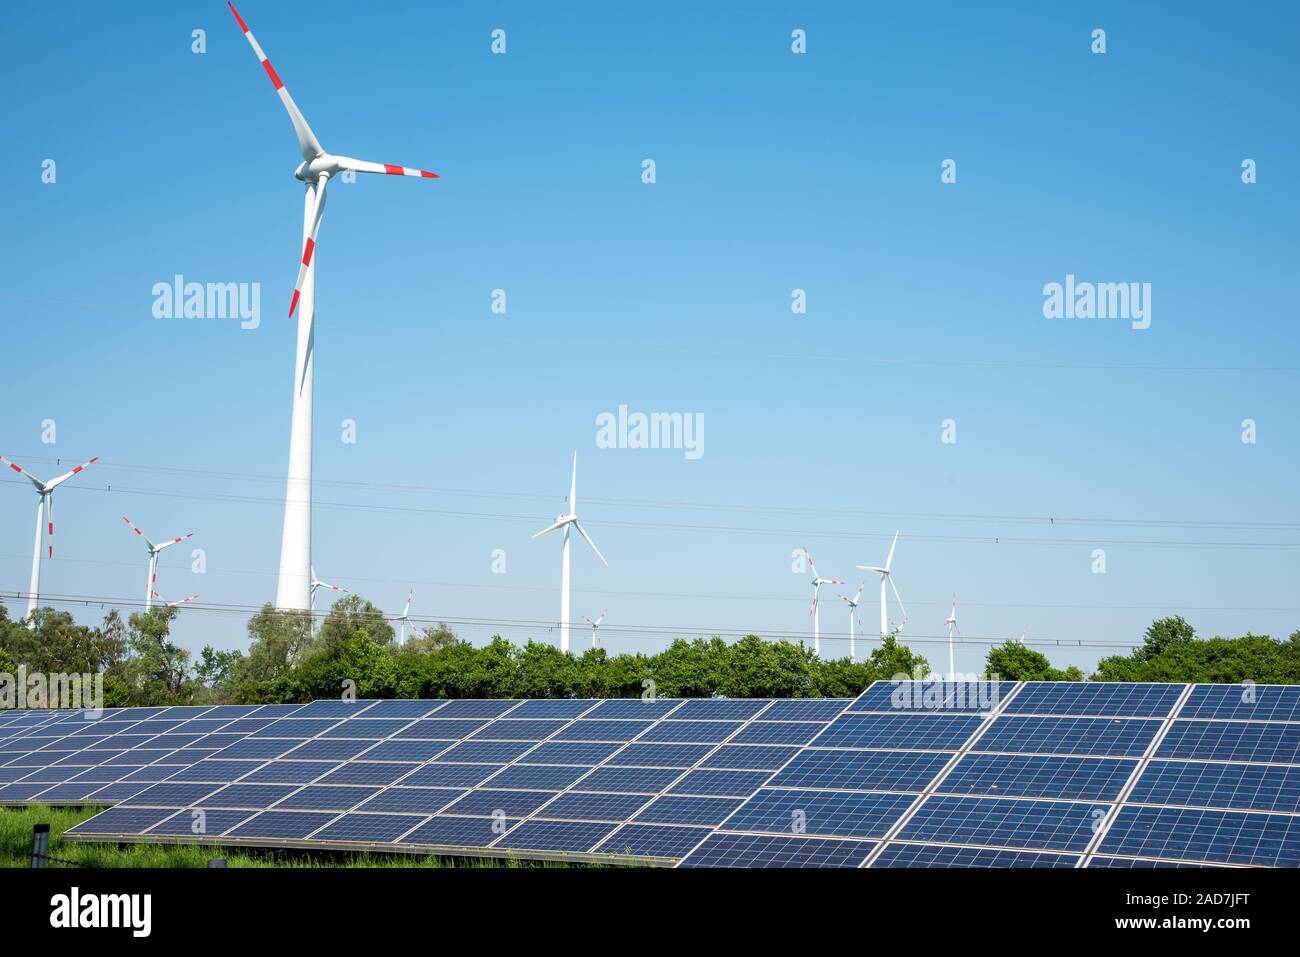 Solar panels, wind power plants and overhead lines seen in Germany Stock Photo